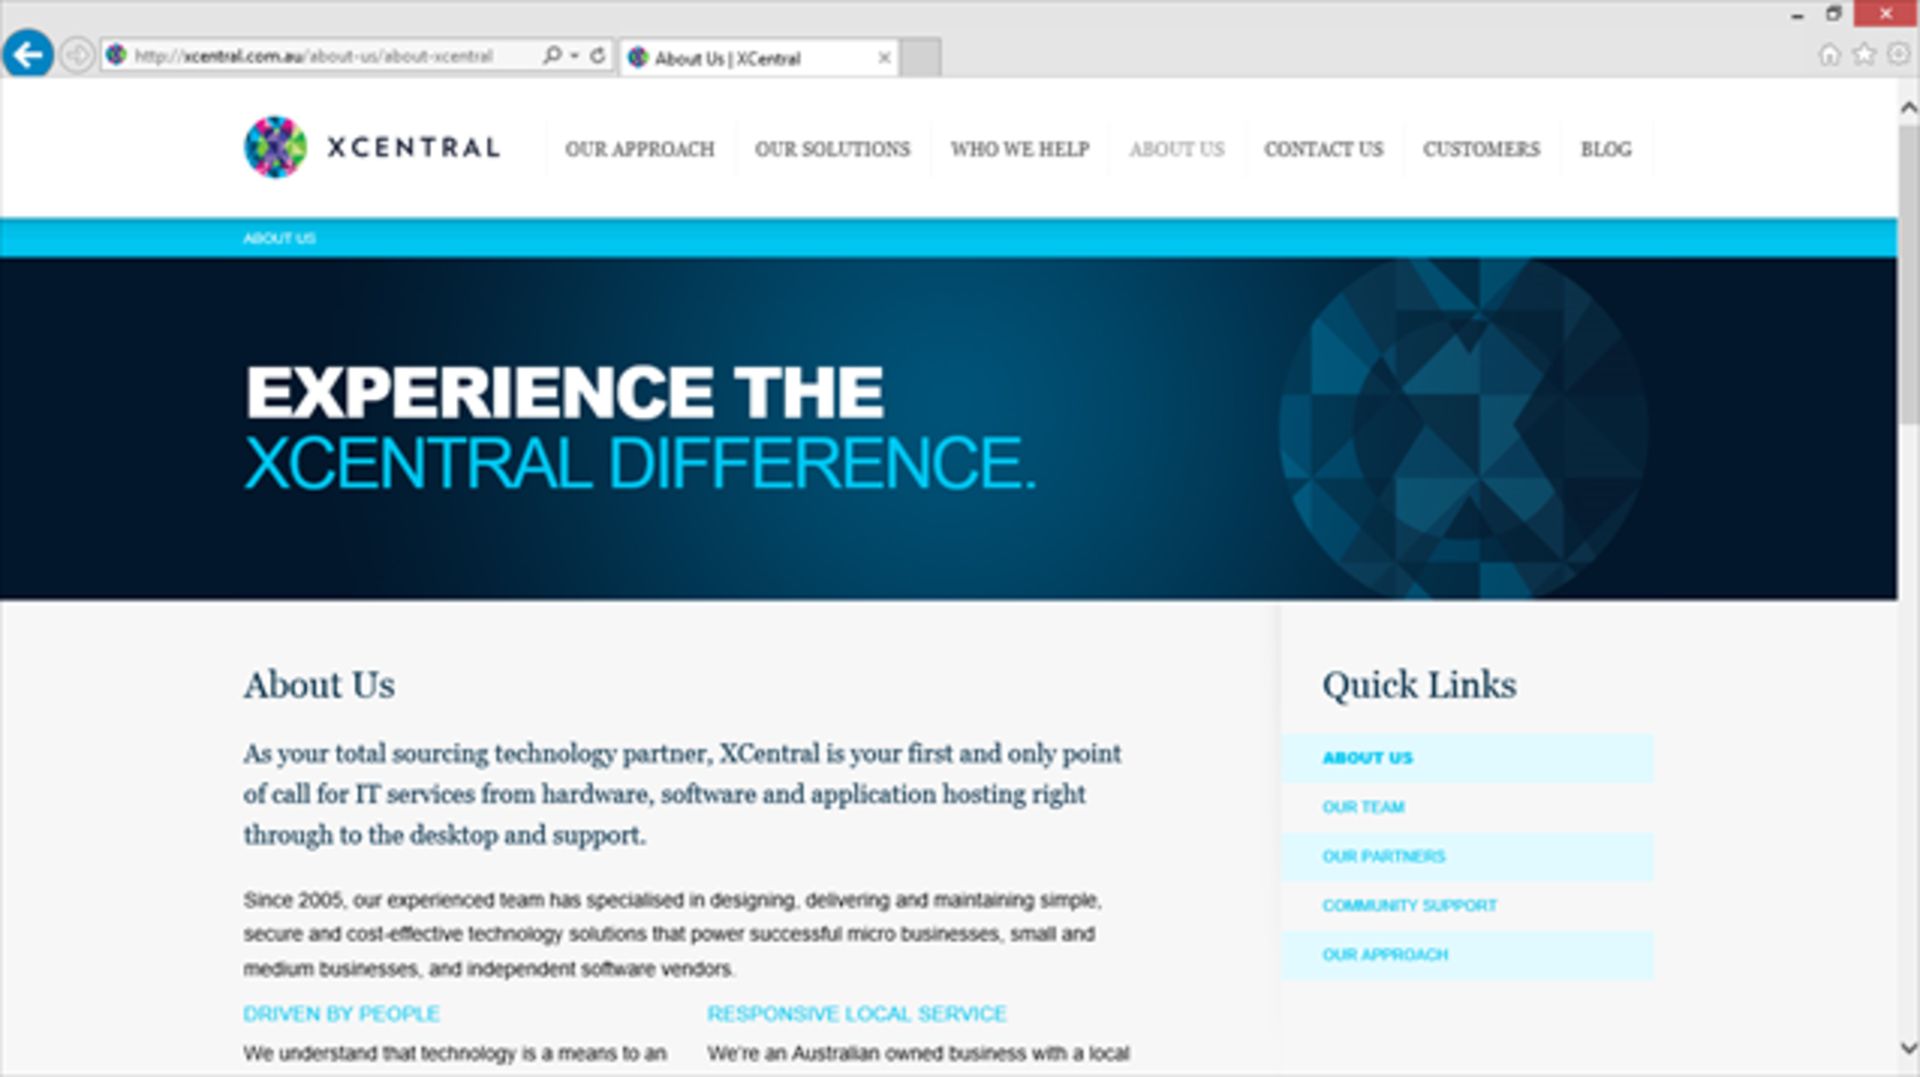 xcentral-ie-1366-768 638x358